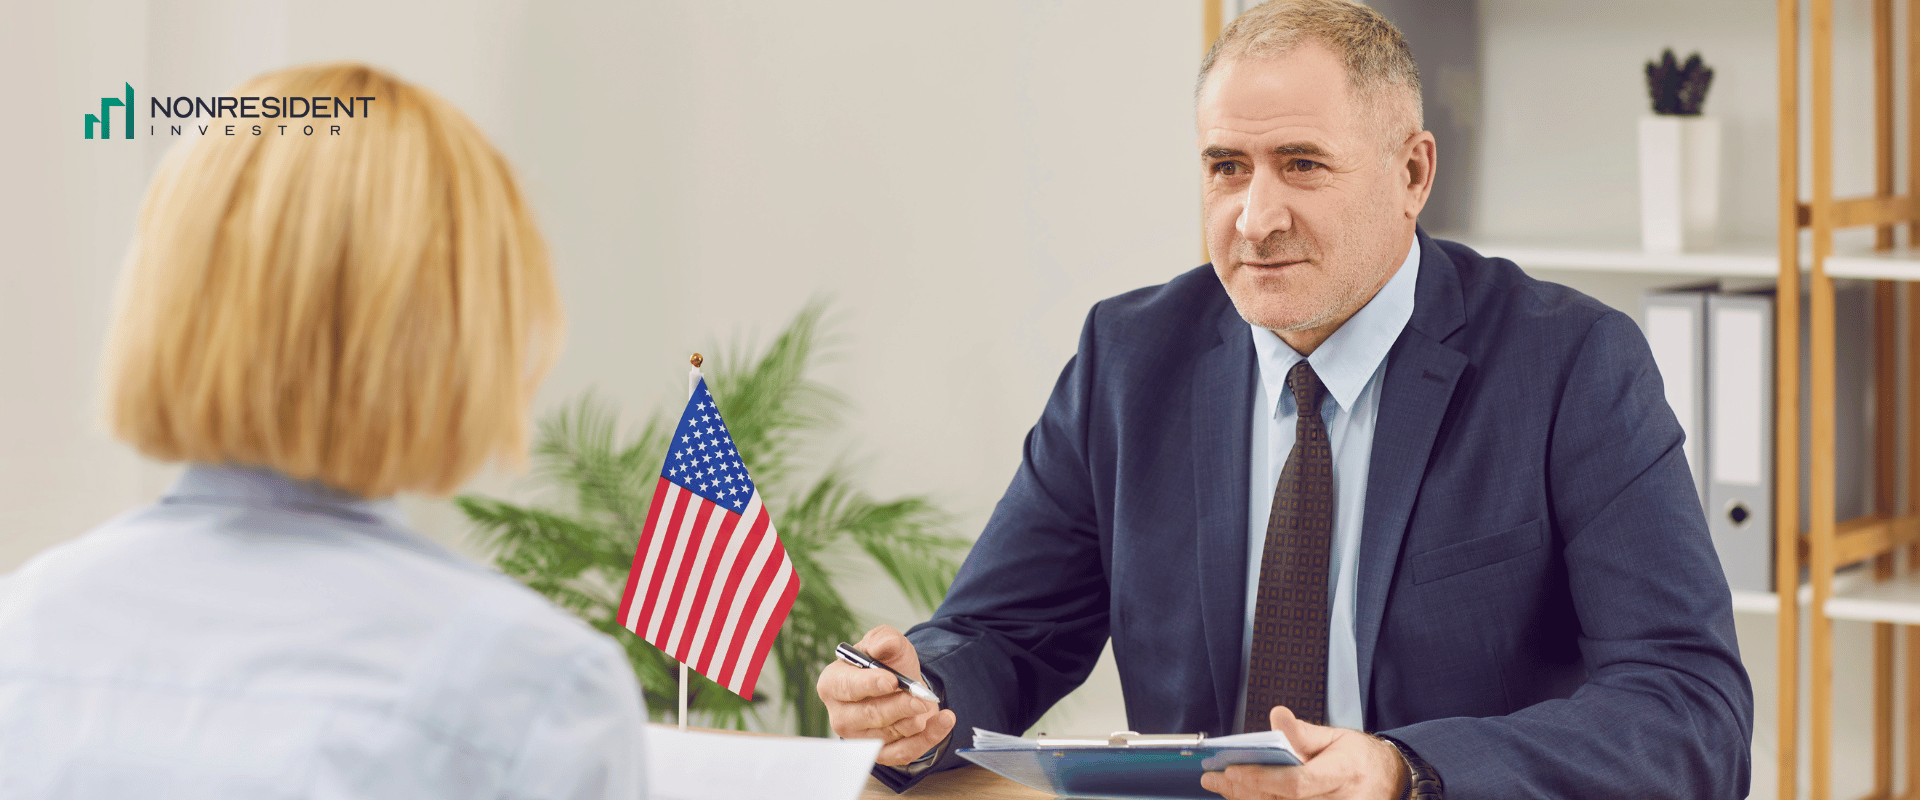 visa interview for moving to USA